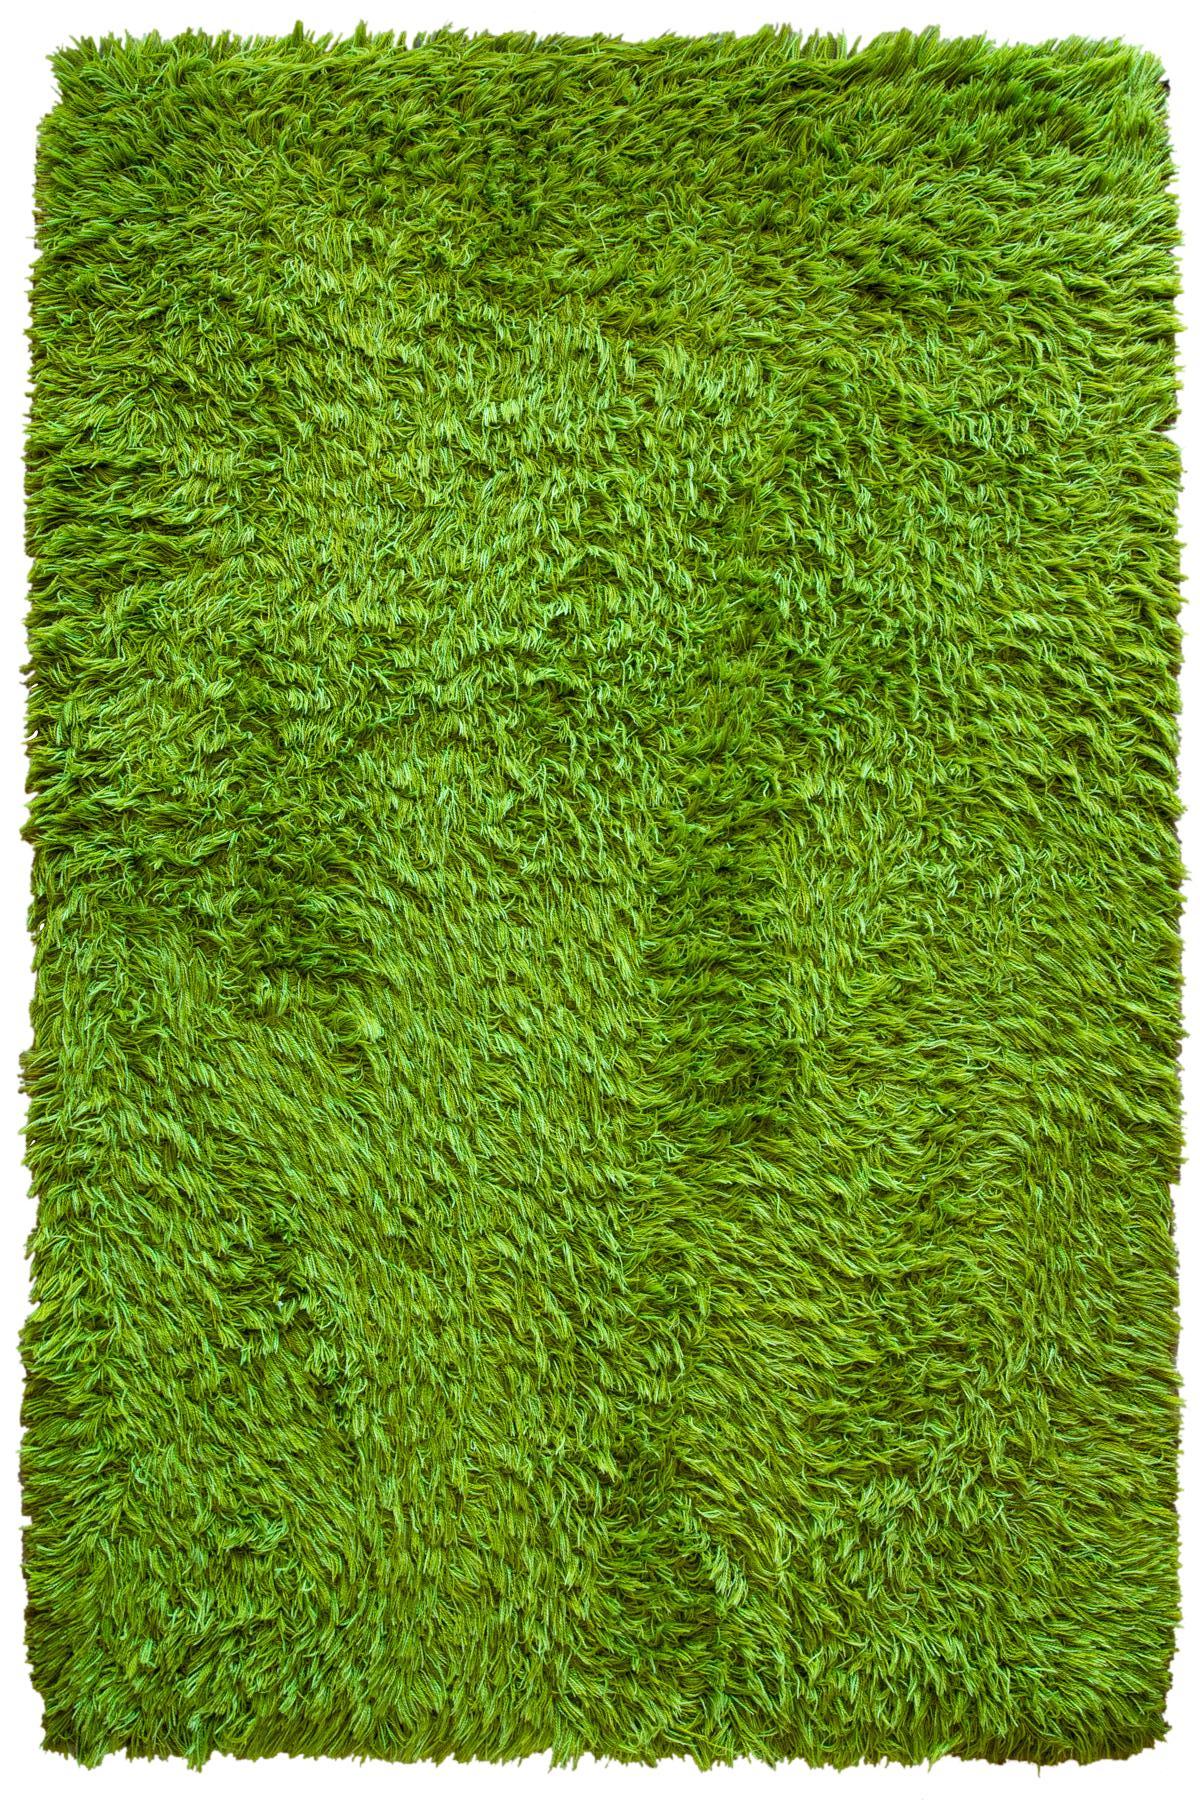 Beautiful Swedish Blekingerya Rya rug in a medium dark avocado green. Kept in storage for most of its life, this rug is in exceptional condition. Rare solid color example without decoration.